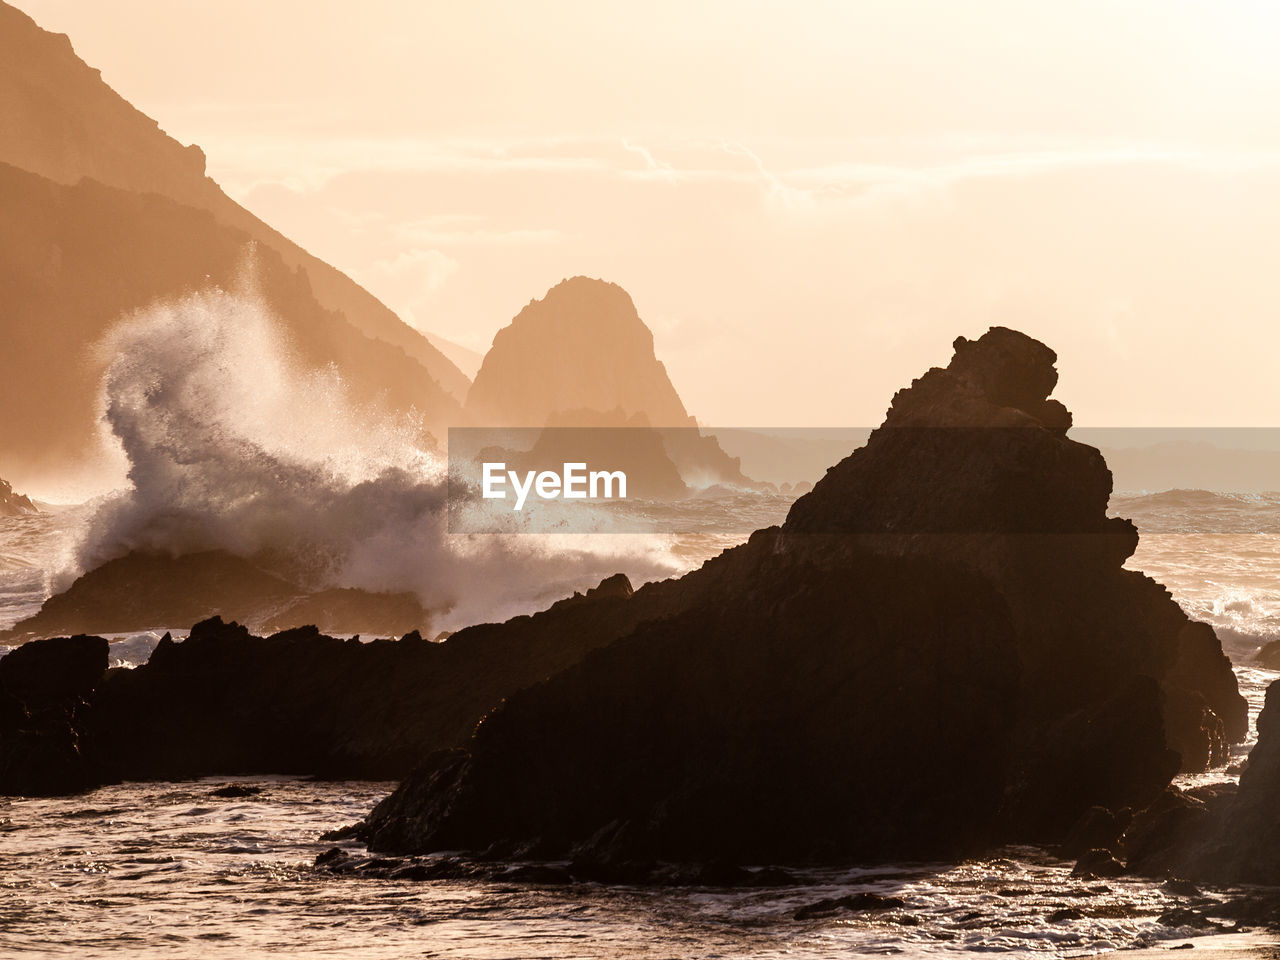 coast, wave, water, ocean, sea, land, rock, beauty in nature, sky, scenics - nature, nature, environment, sunset, mountain, shore, landscape, horizon, beach, travel, travel destinations, no people, wind wave, outdoors, rock formation, tranquility, cloud, sun, bay, dawn, sunlight, cliff, silhouette, terrain, motion, tranquil scene, sand